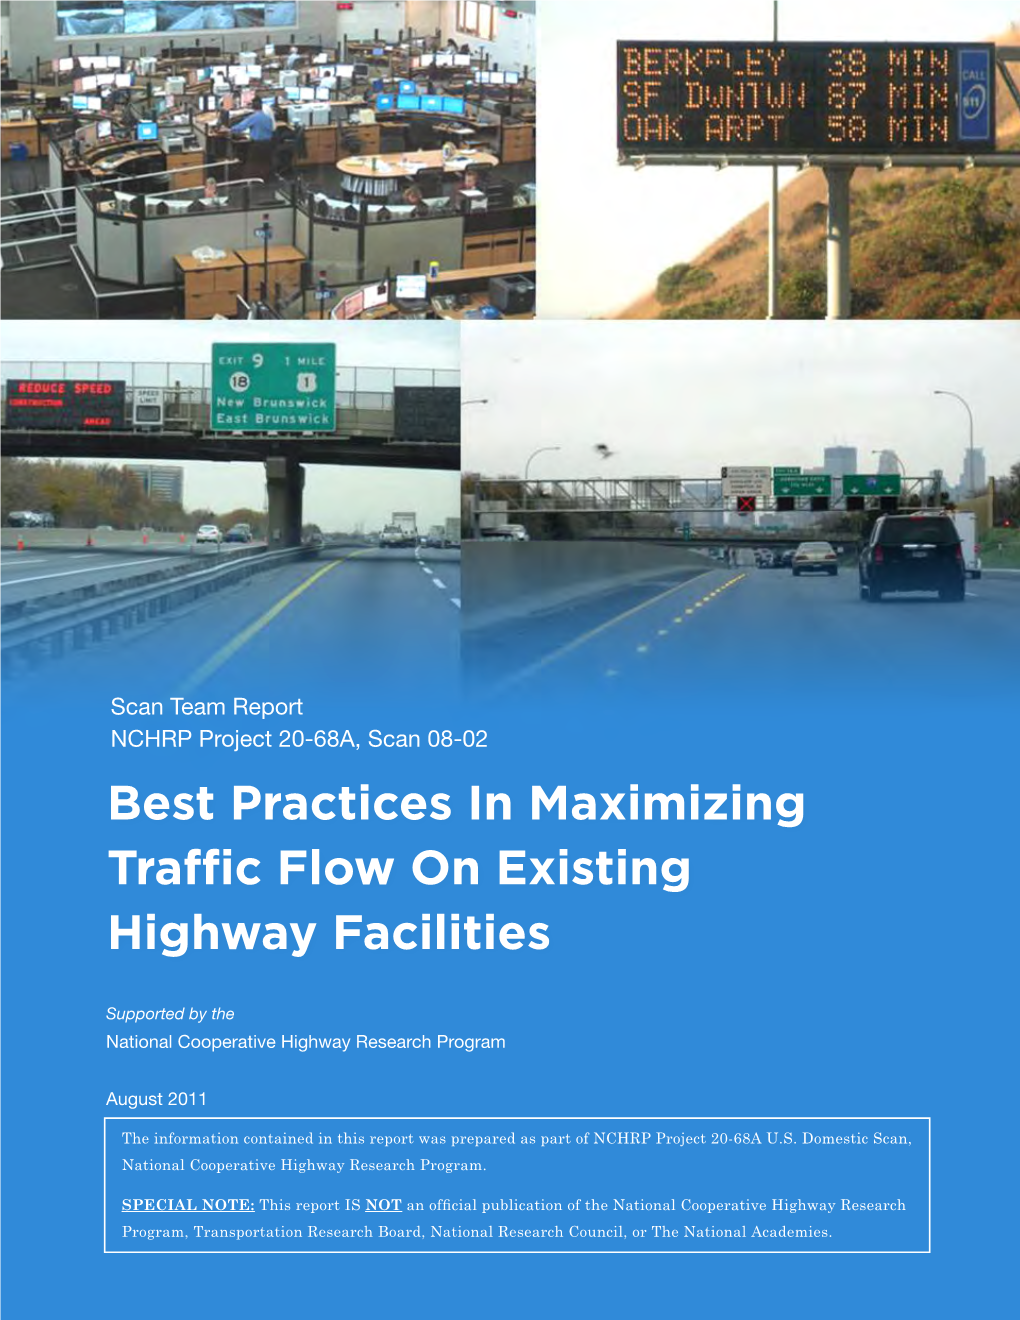 Best Practices in Maximizing Traffic Flow on Existing Highway Facilities